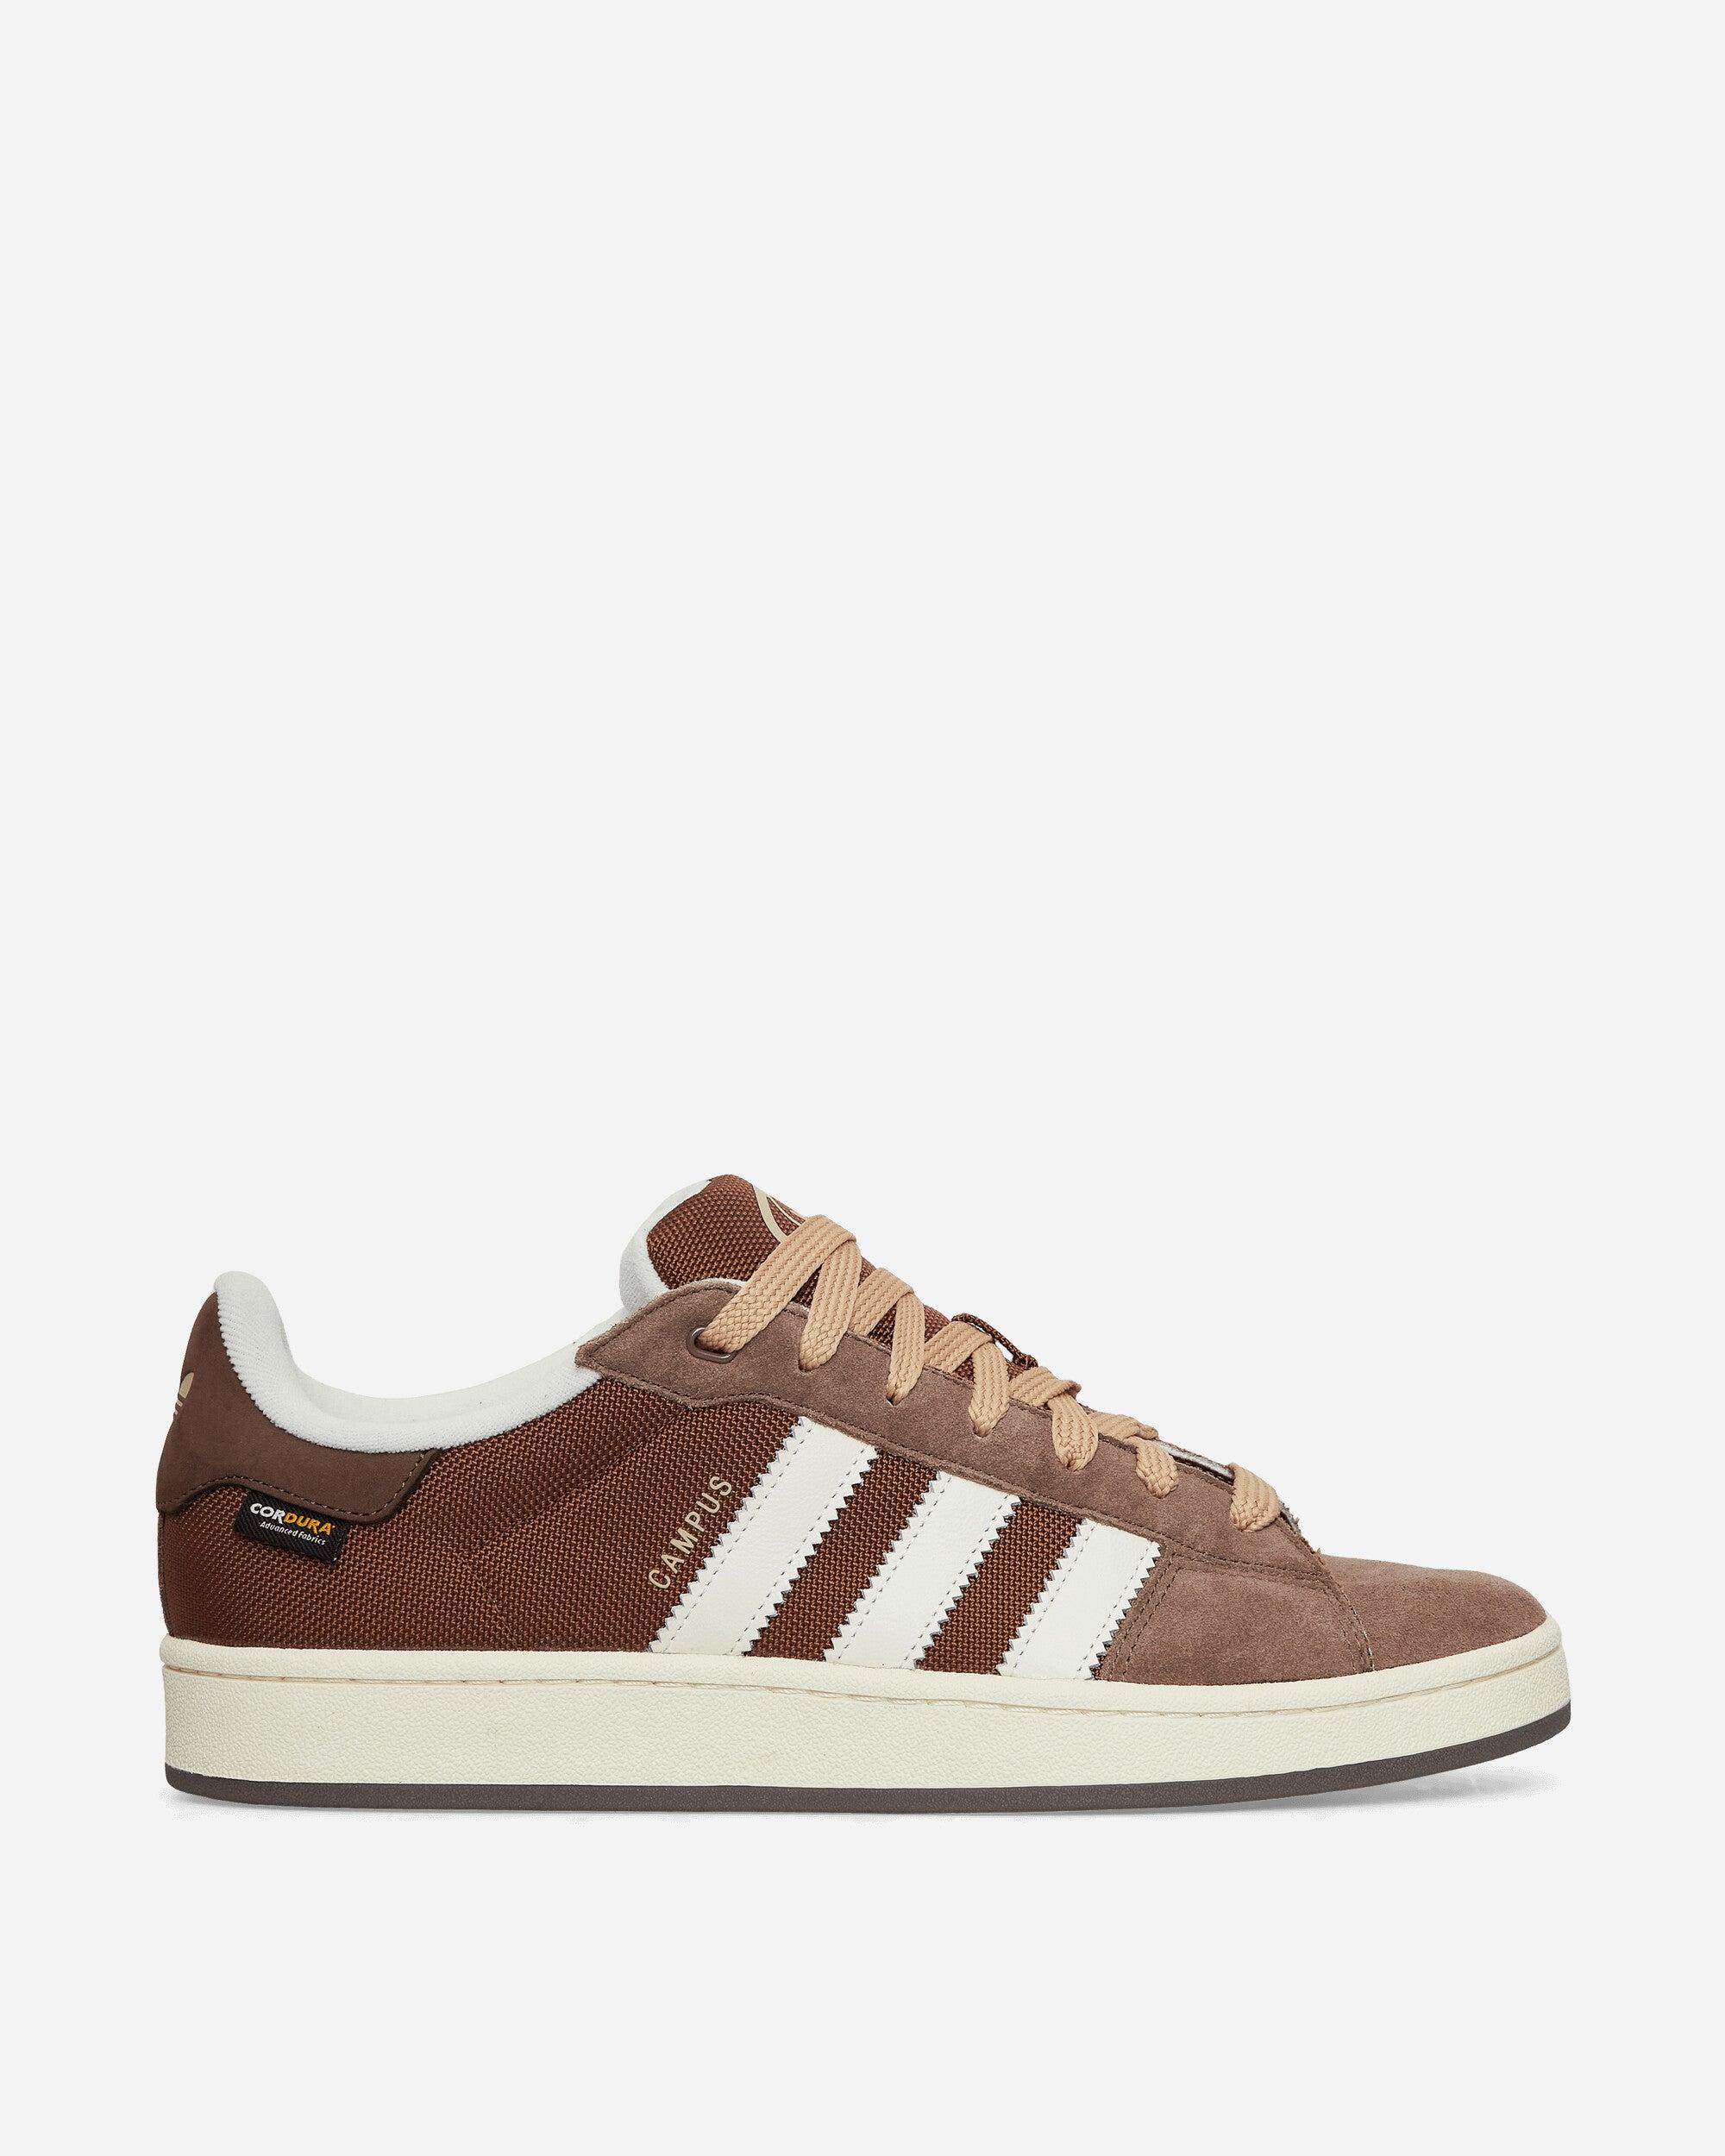 for Brown Men | Preloved Lyst Campus Off / / adidas White Earth 00s Strata Sneaker